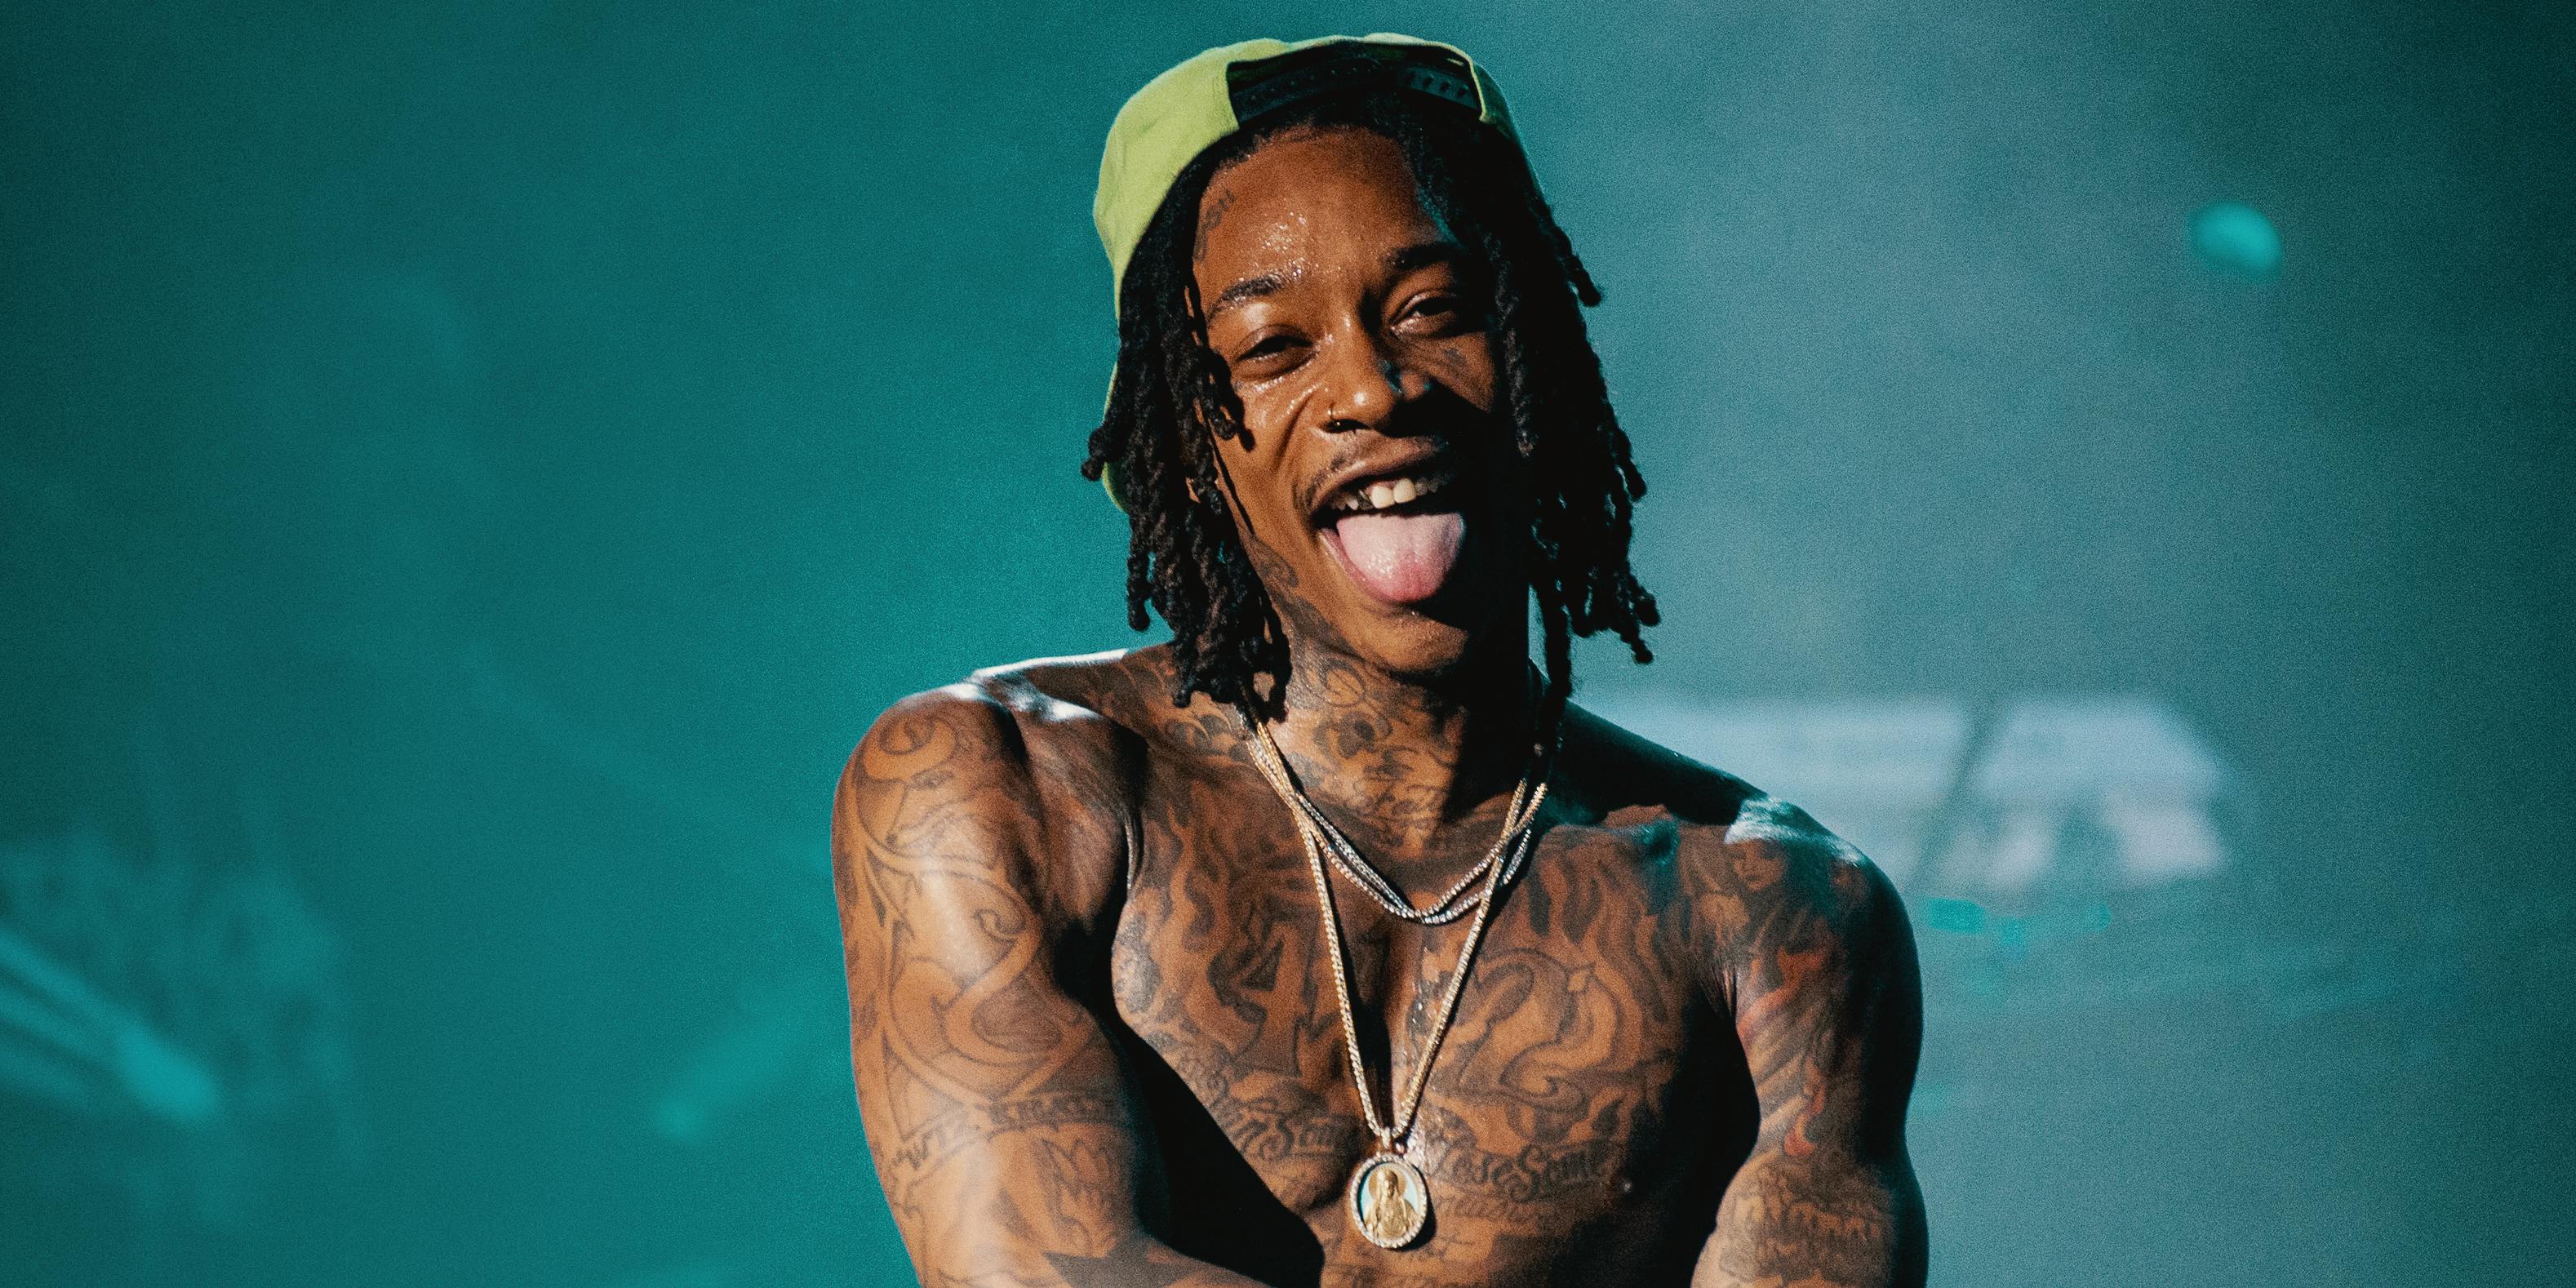 Wiz Khalifa performs live on stage in concert at the Ford Amphitheater at Coney Island Boardwalk on August 2, 2018 in Brooklyn, New York. Here, Wiz Khalifa performs live on stage in concert at the Ford Amphitheater at Coney Island Boardwalk on August 2, 2018 in Brooklyn, New York.